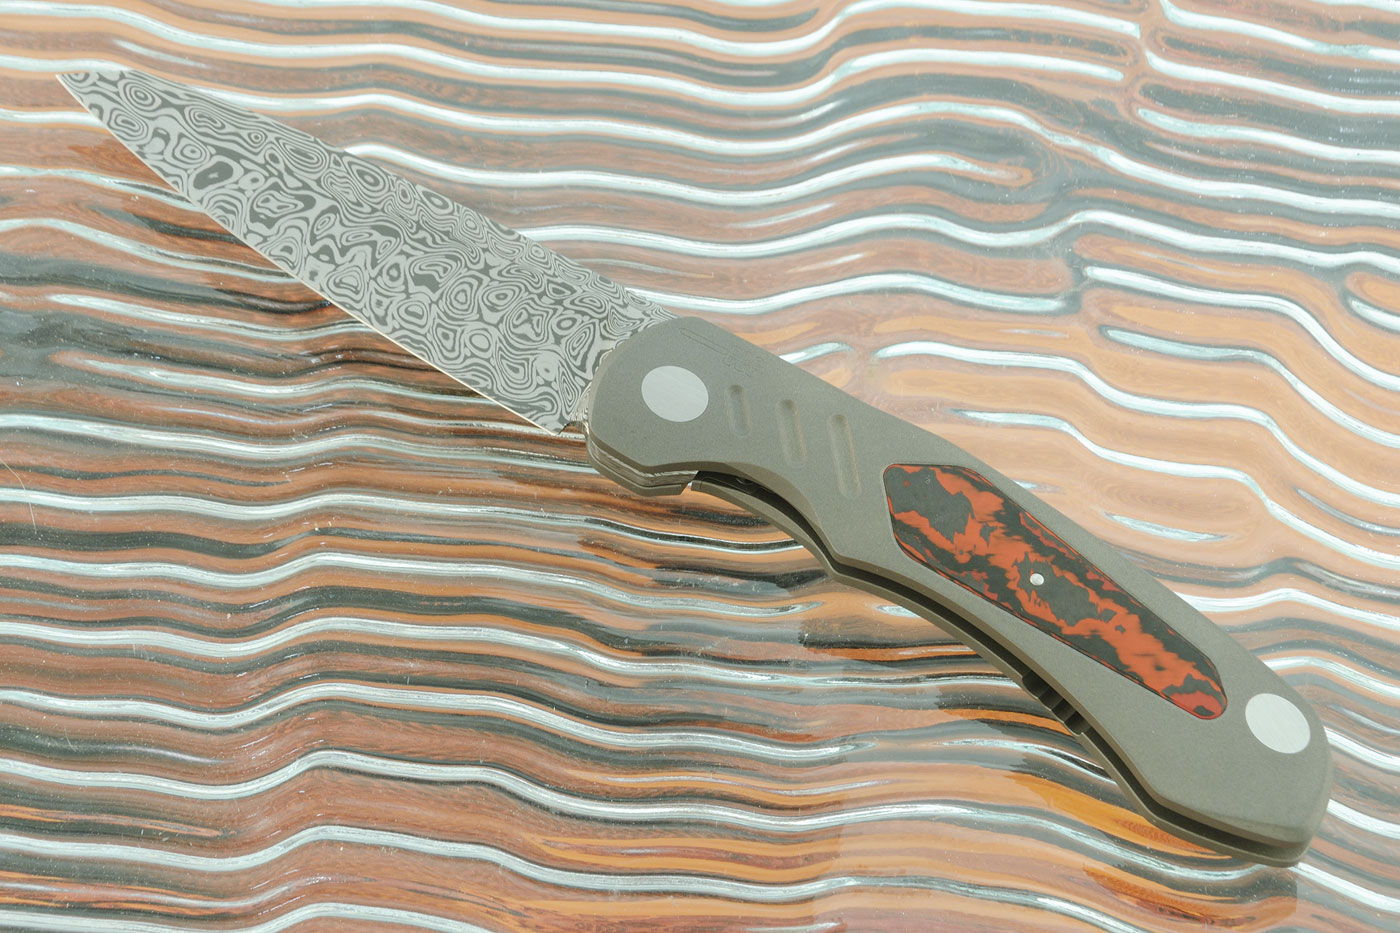 Viper Ex Front Flipper with Damasteel and Lavaflow FatCarbon